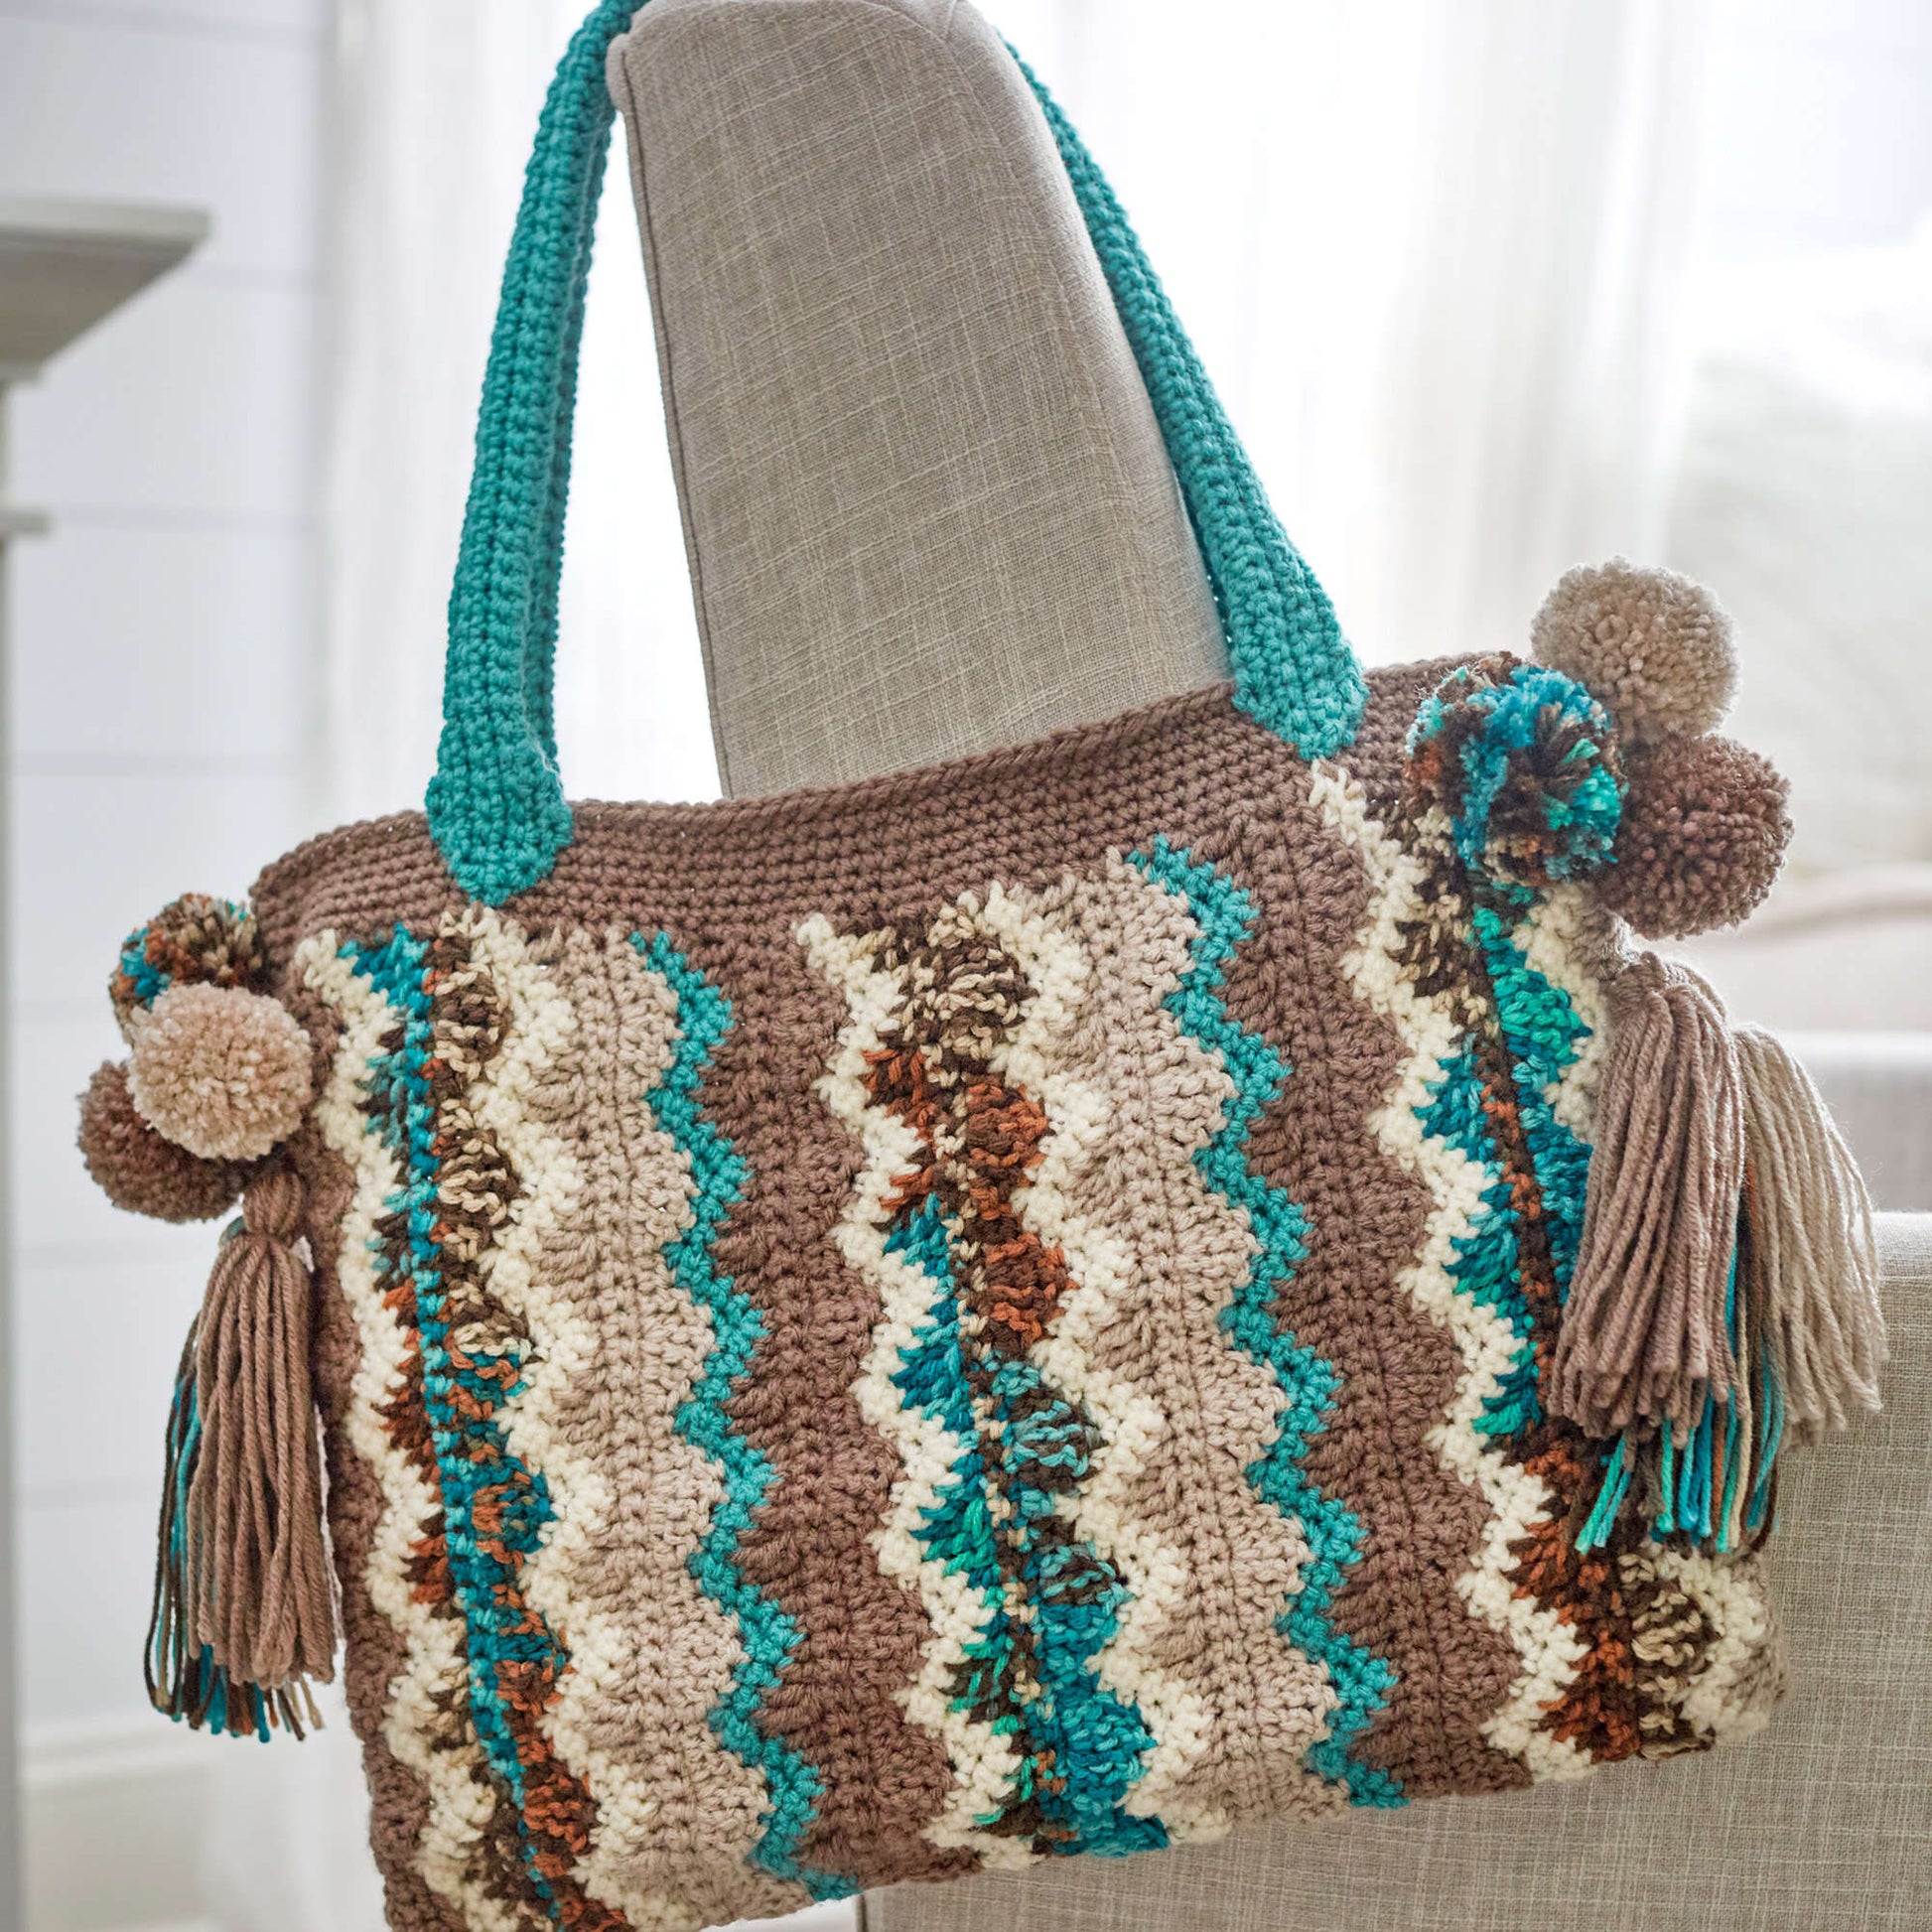 Free Red Heart Crochet Flame Stitch Bag Pattern